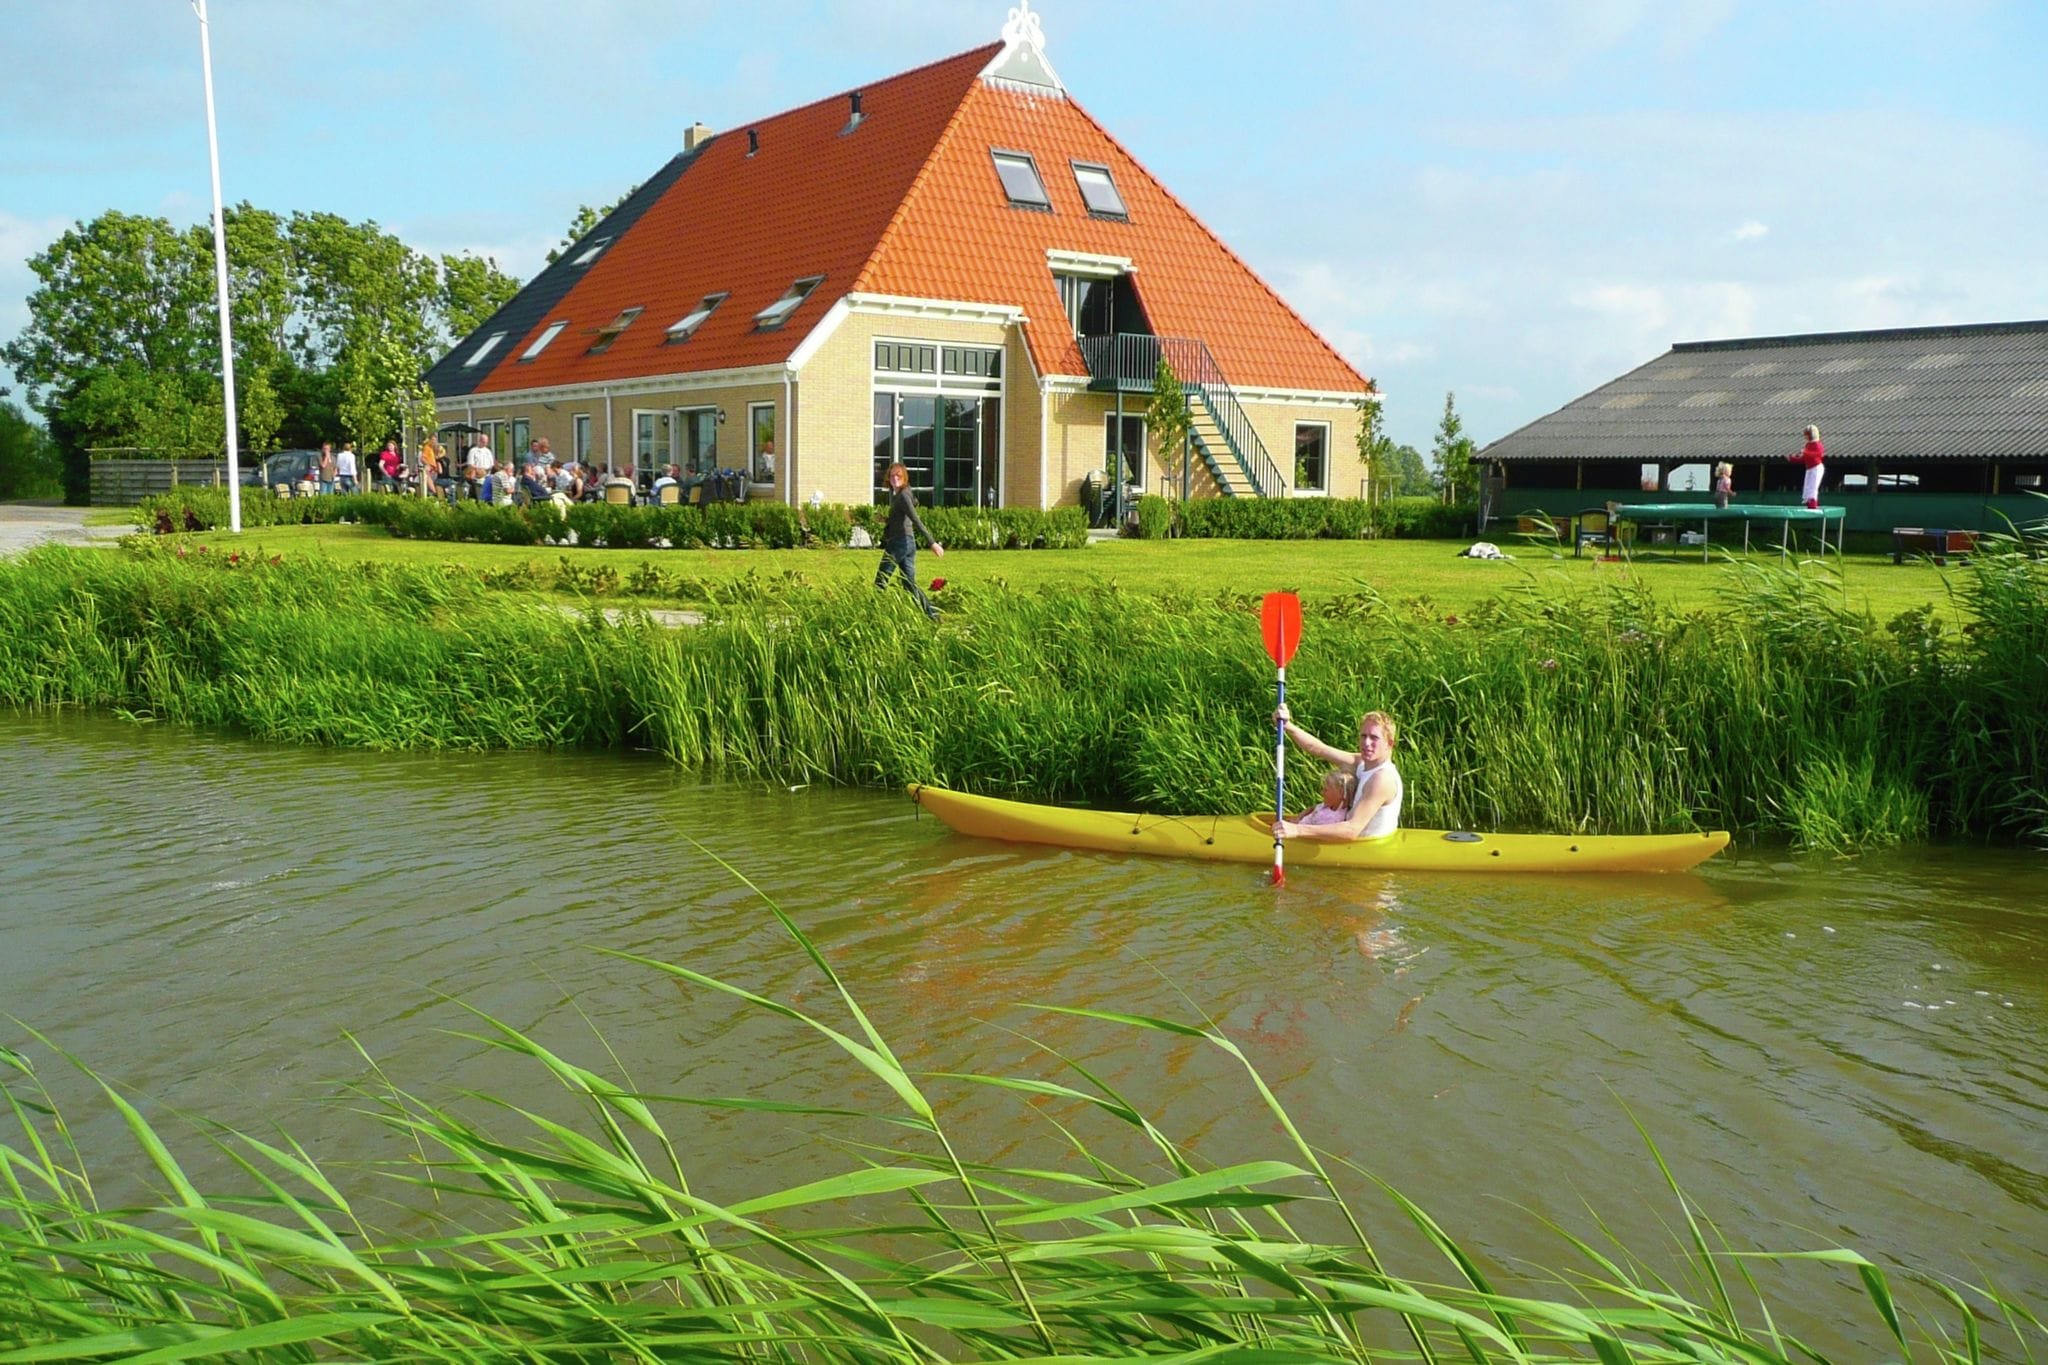 Recreational farm located in a beautiful area of Friesland